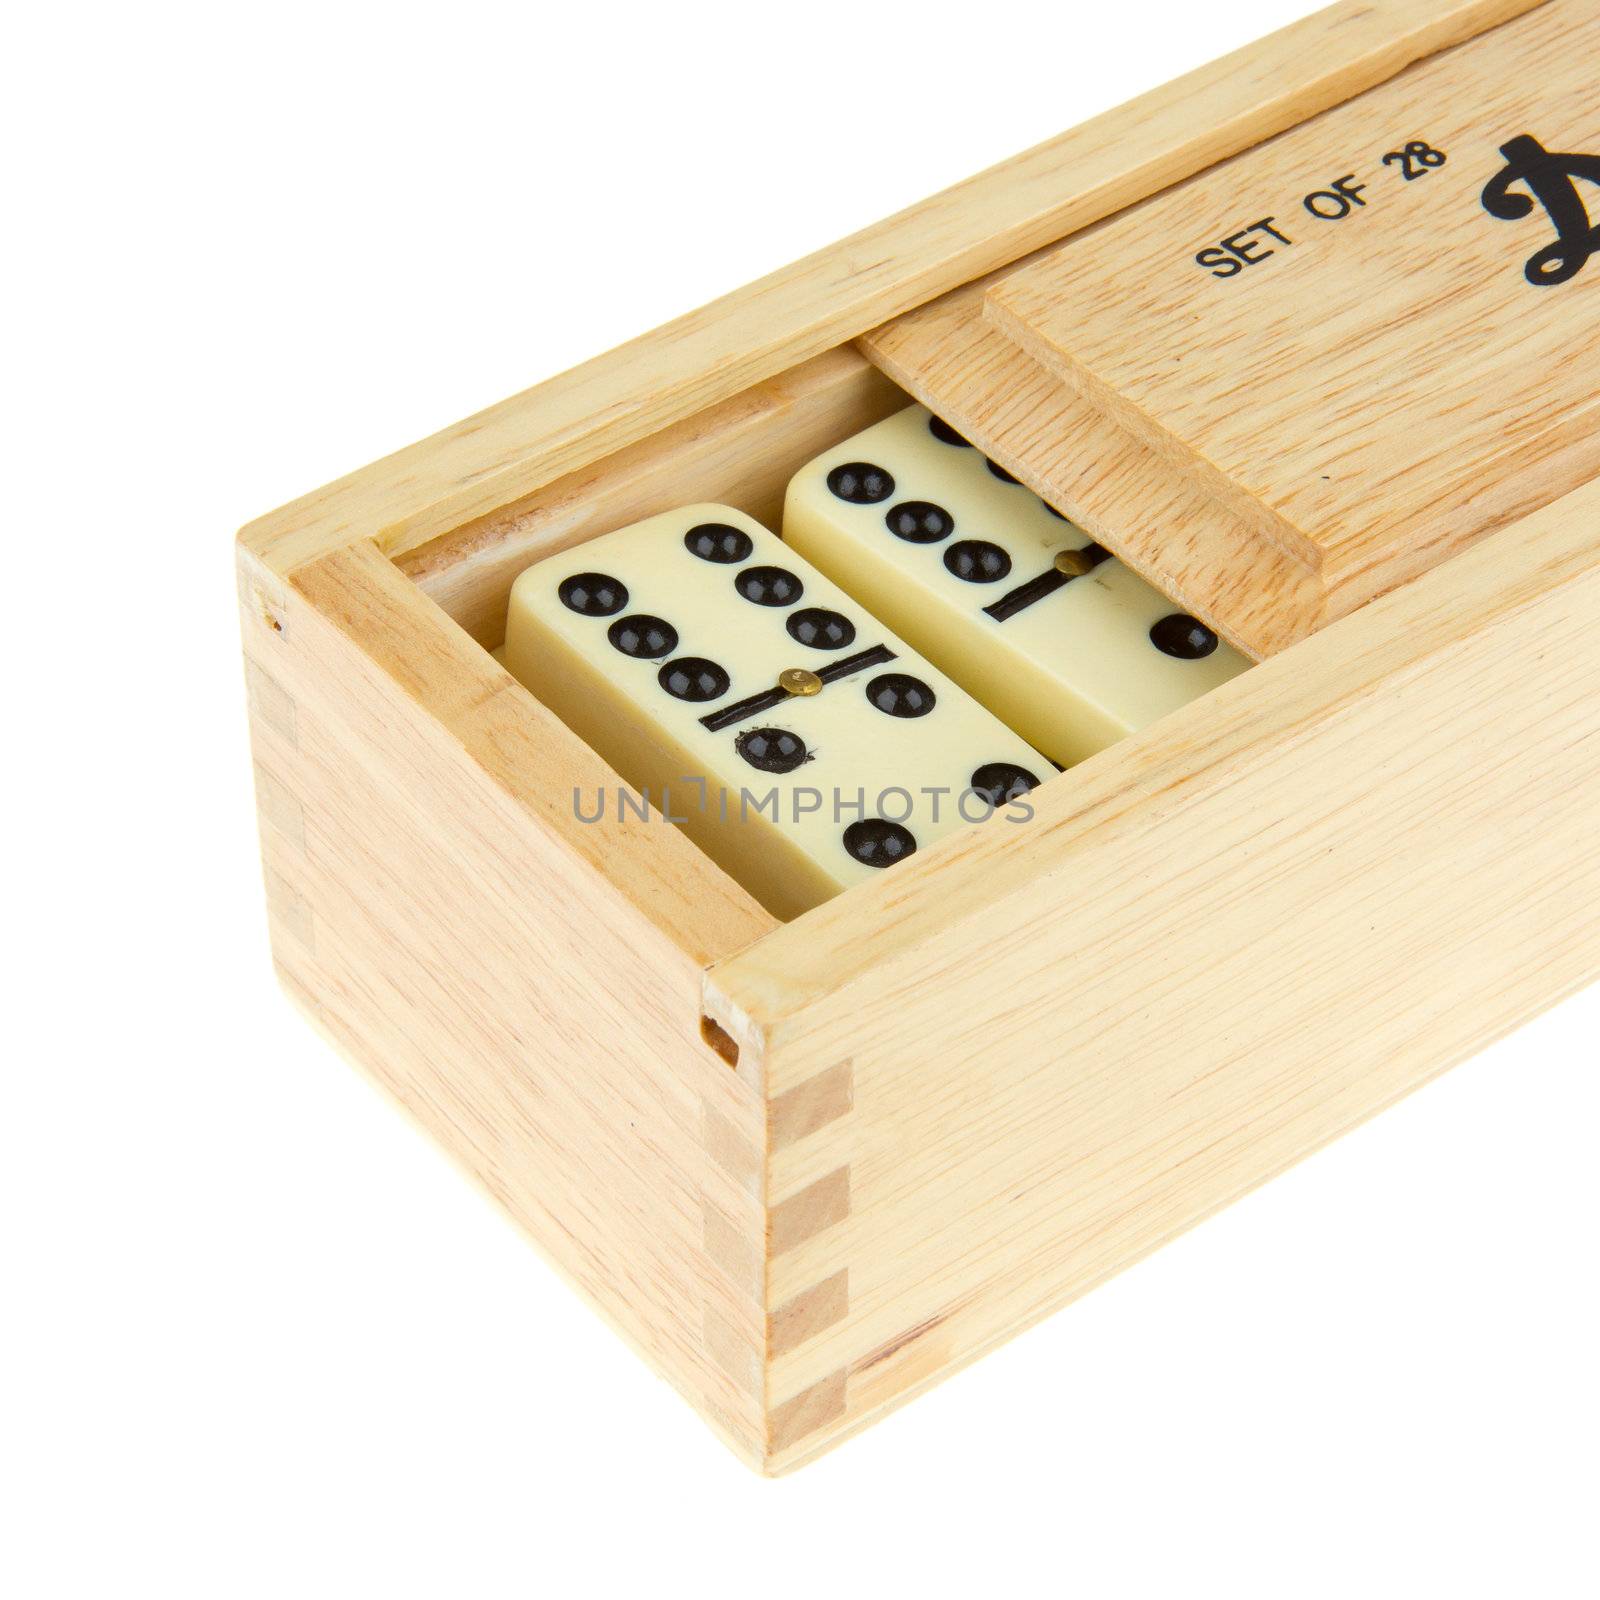 Domino in wooden box by michaklootwijk